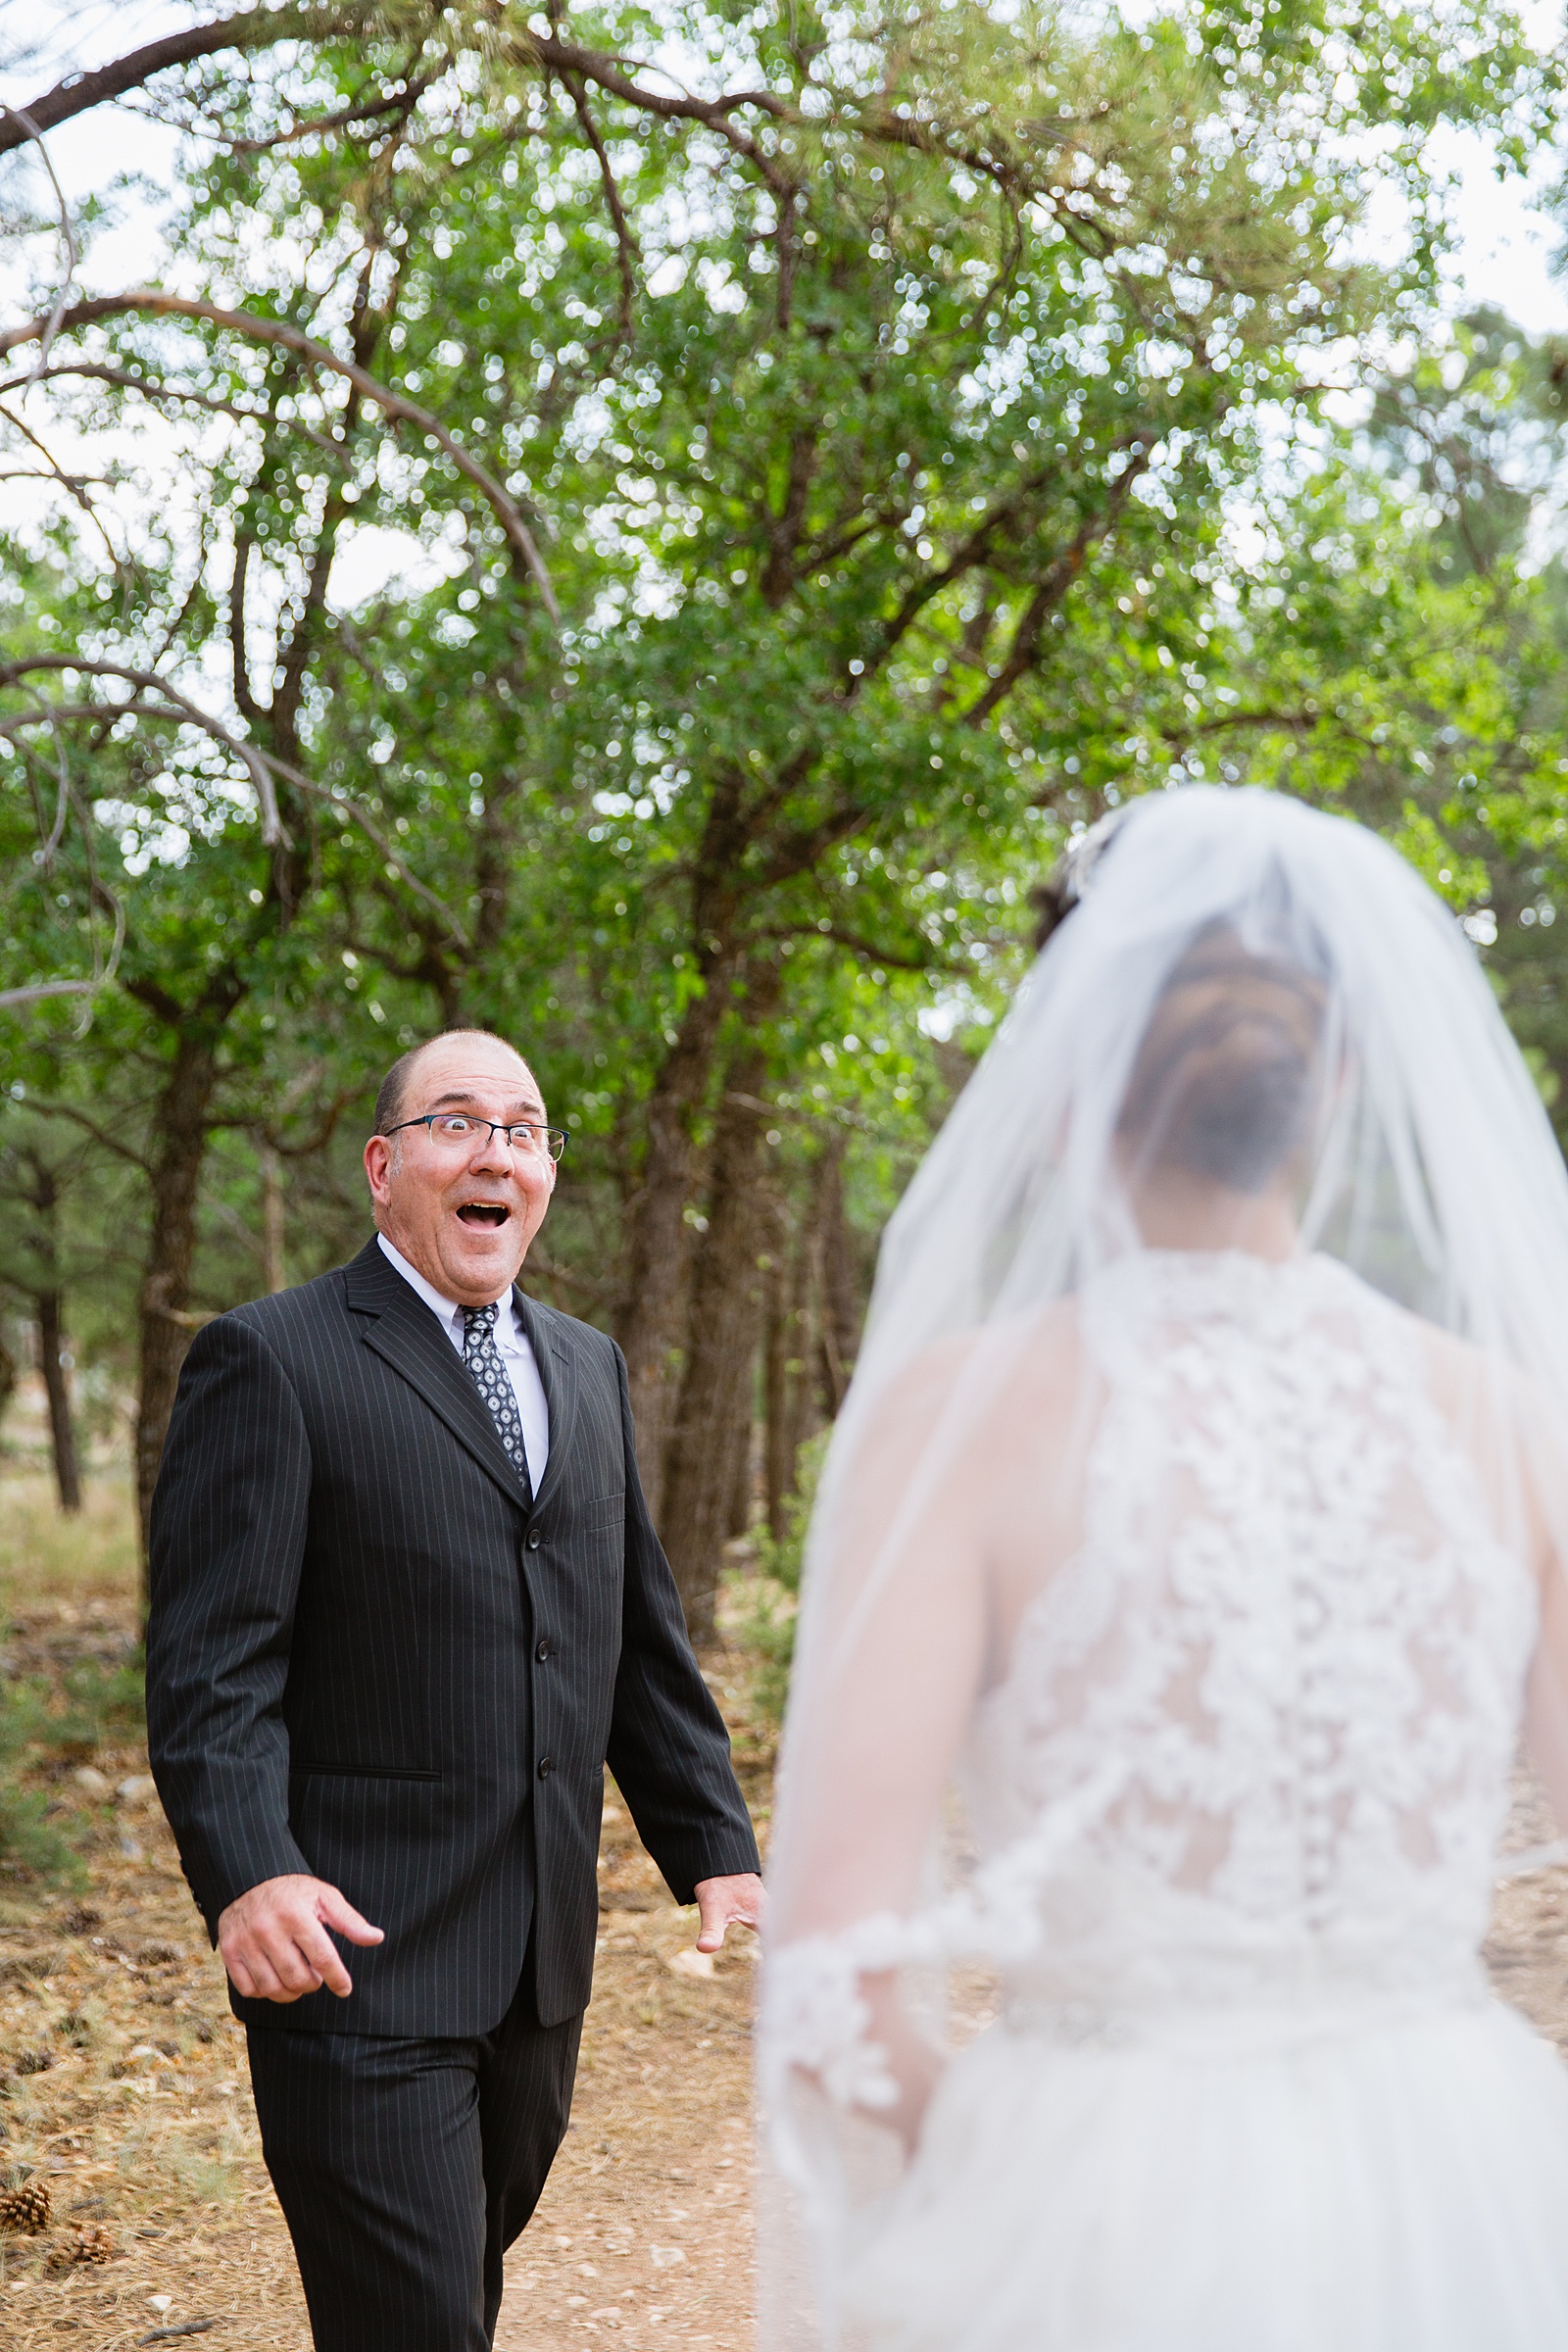 Bride's first look with her dad on her wedding day by Arizona elopement photographer PMA Photography.